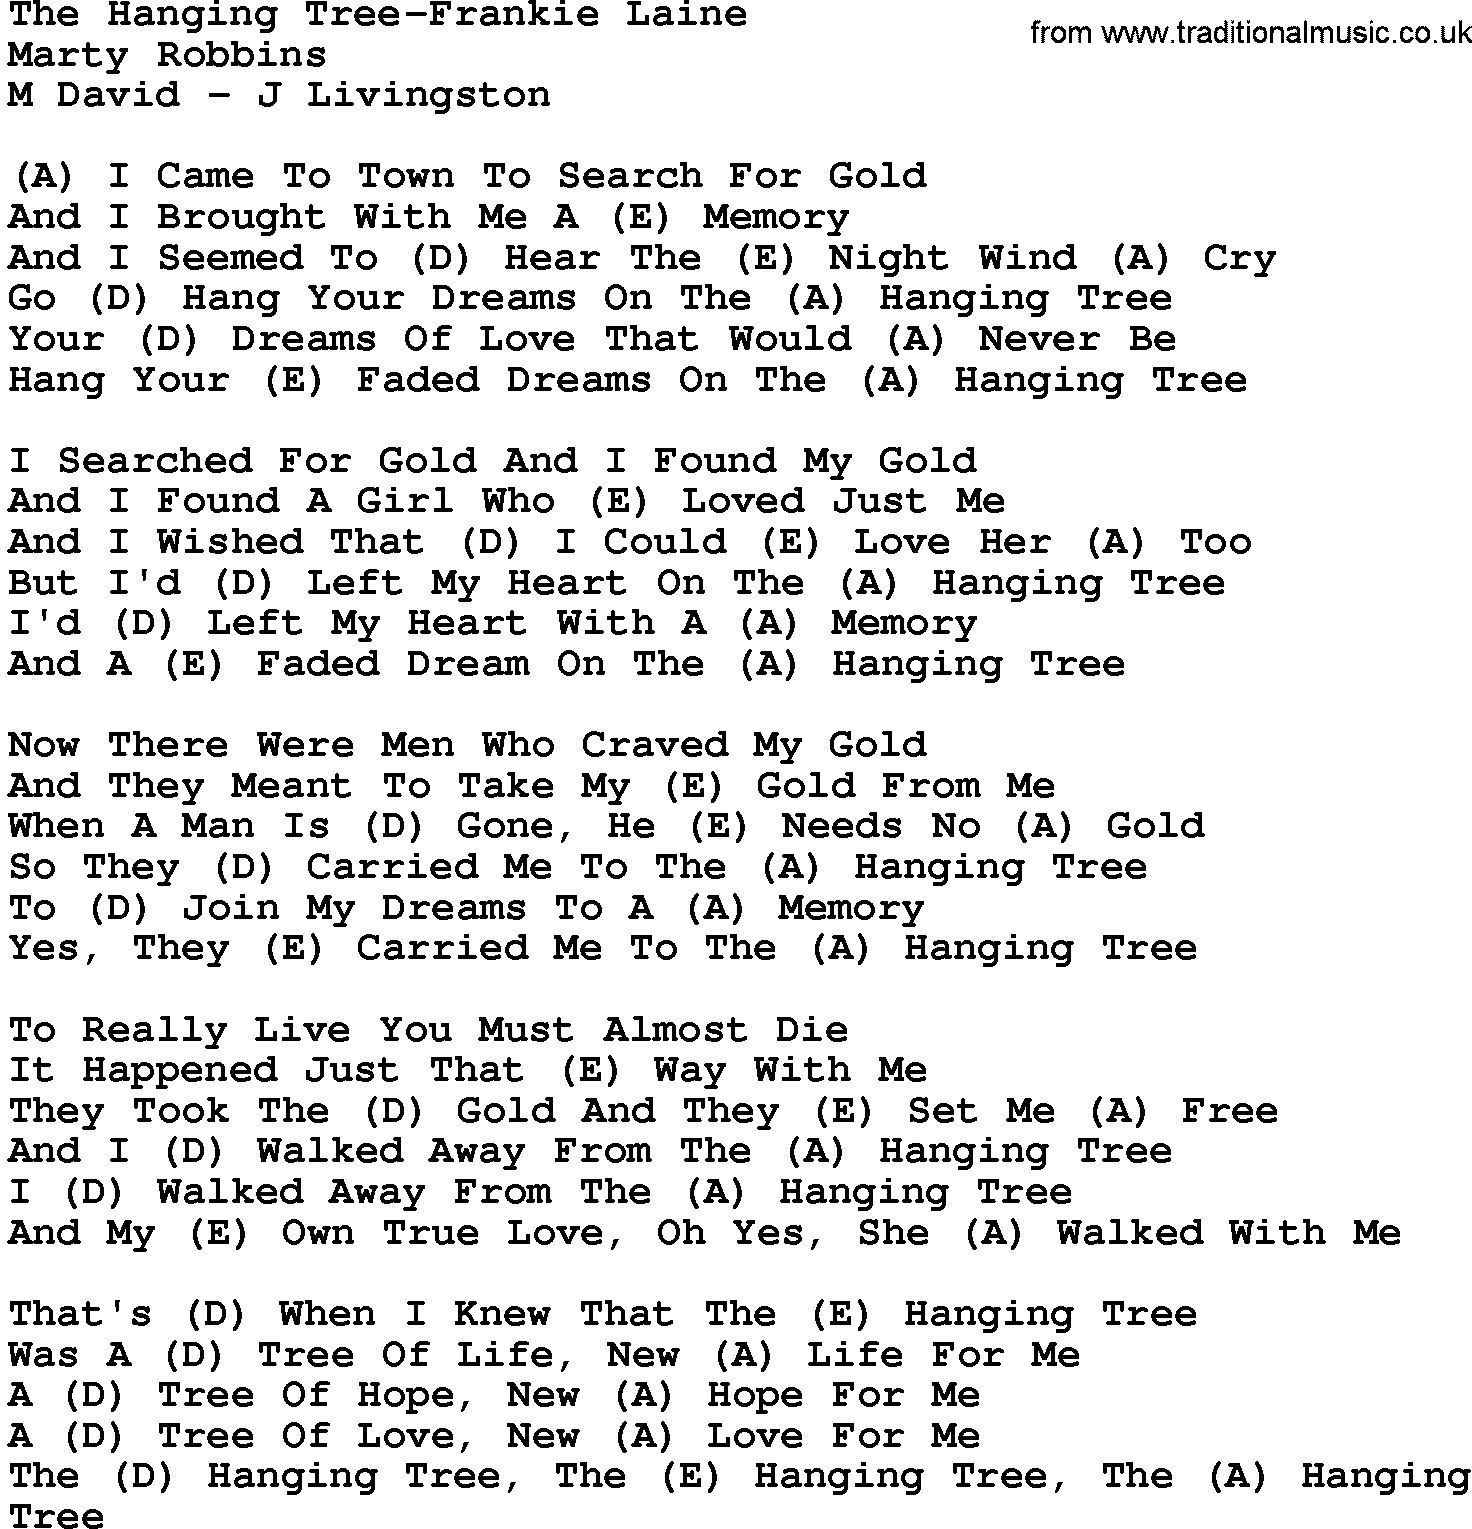 Country music song: The Hanging Tree-Frankie Laine lyrics and chords